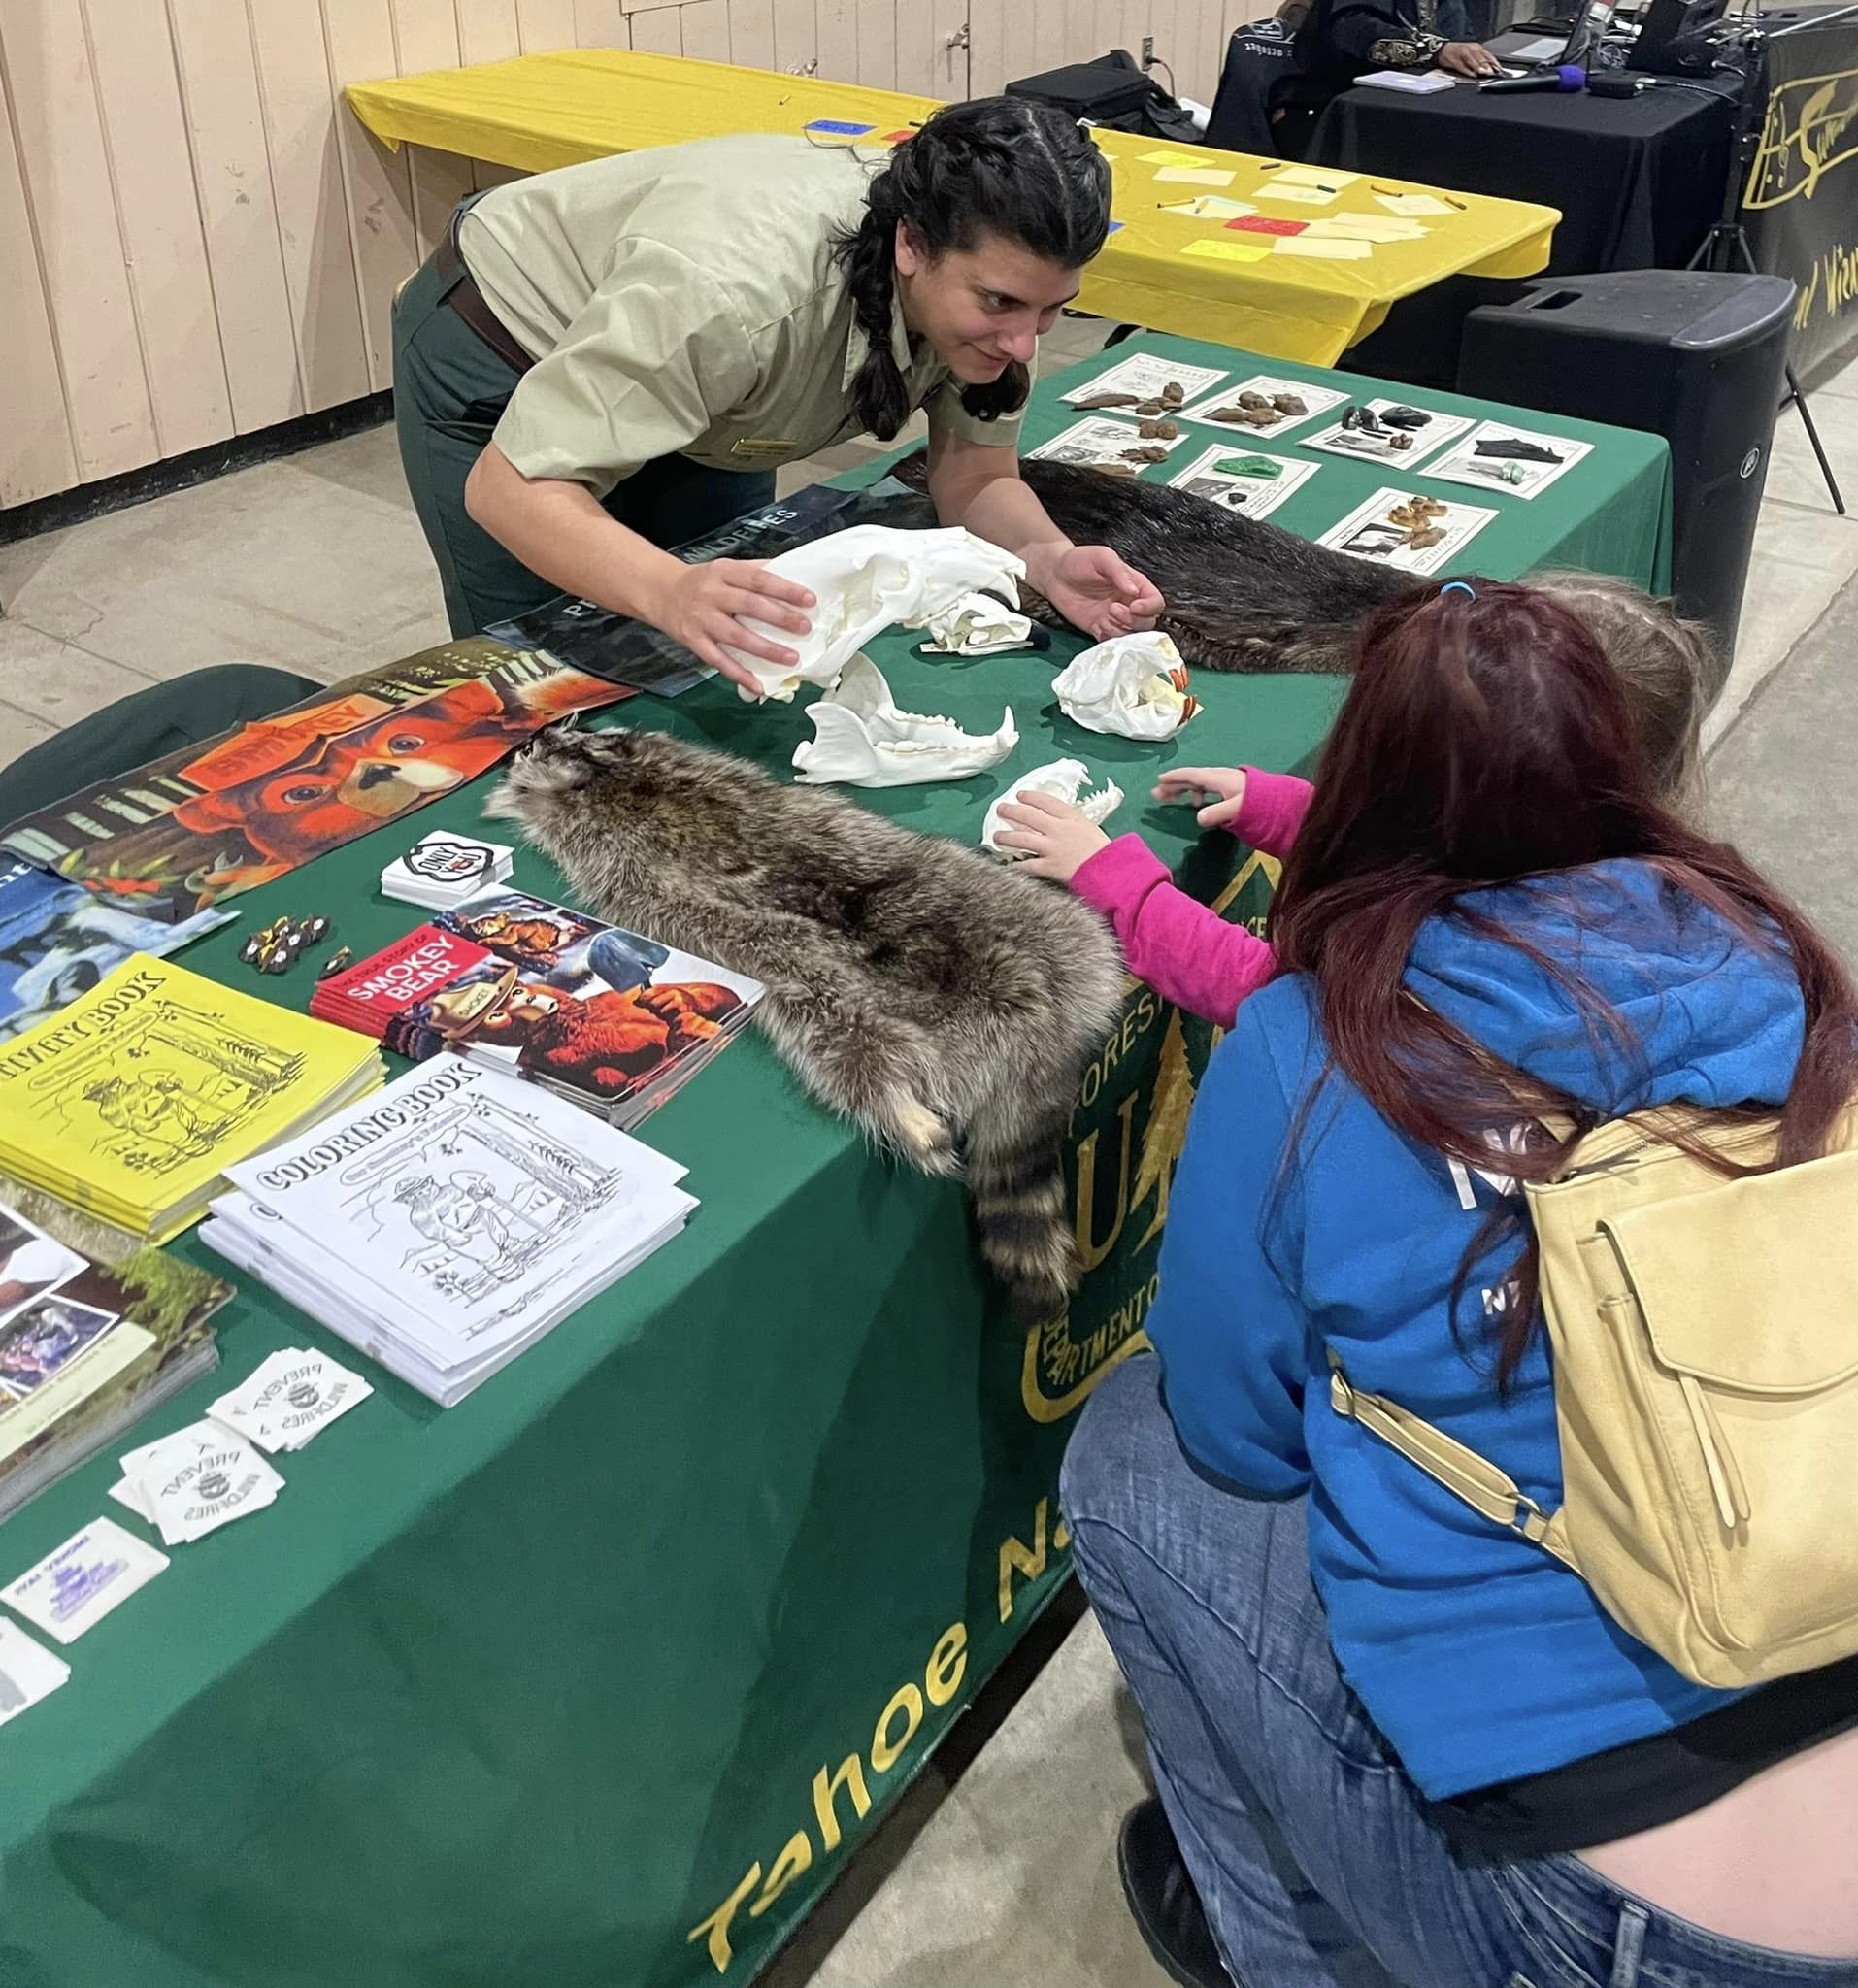 A person leans over a table to show a child some forest products.